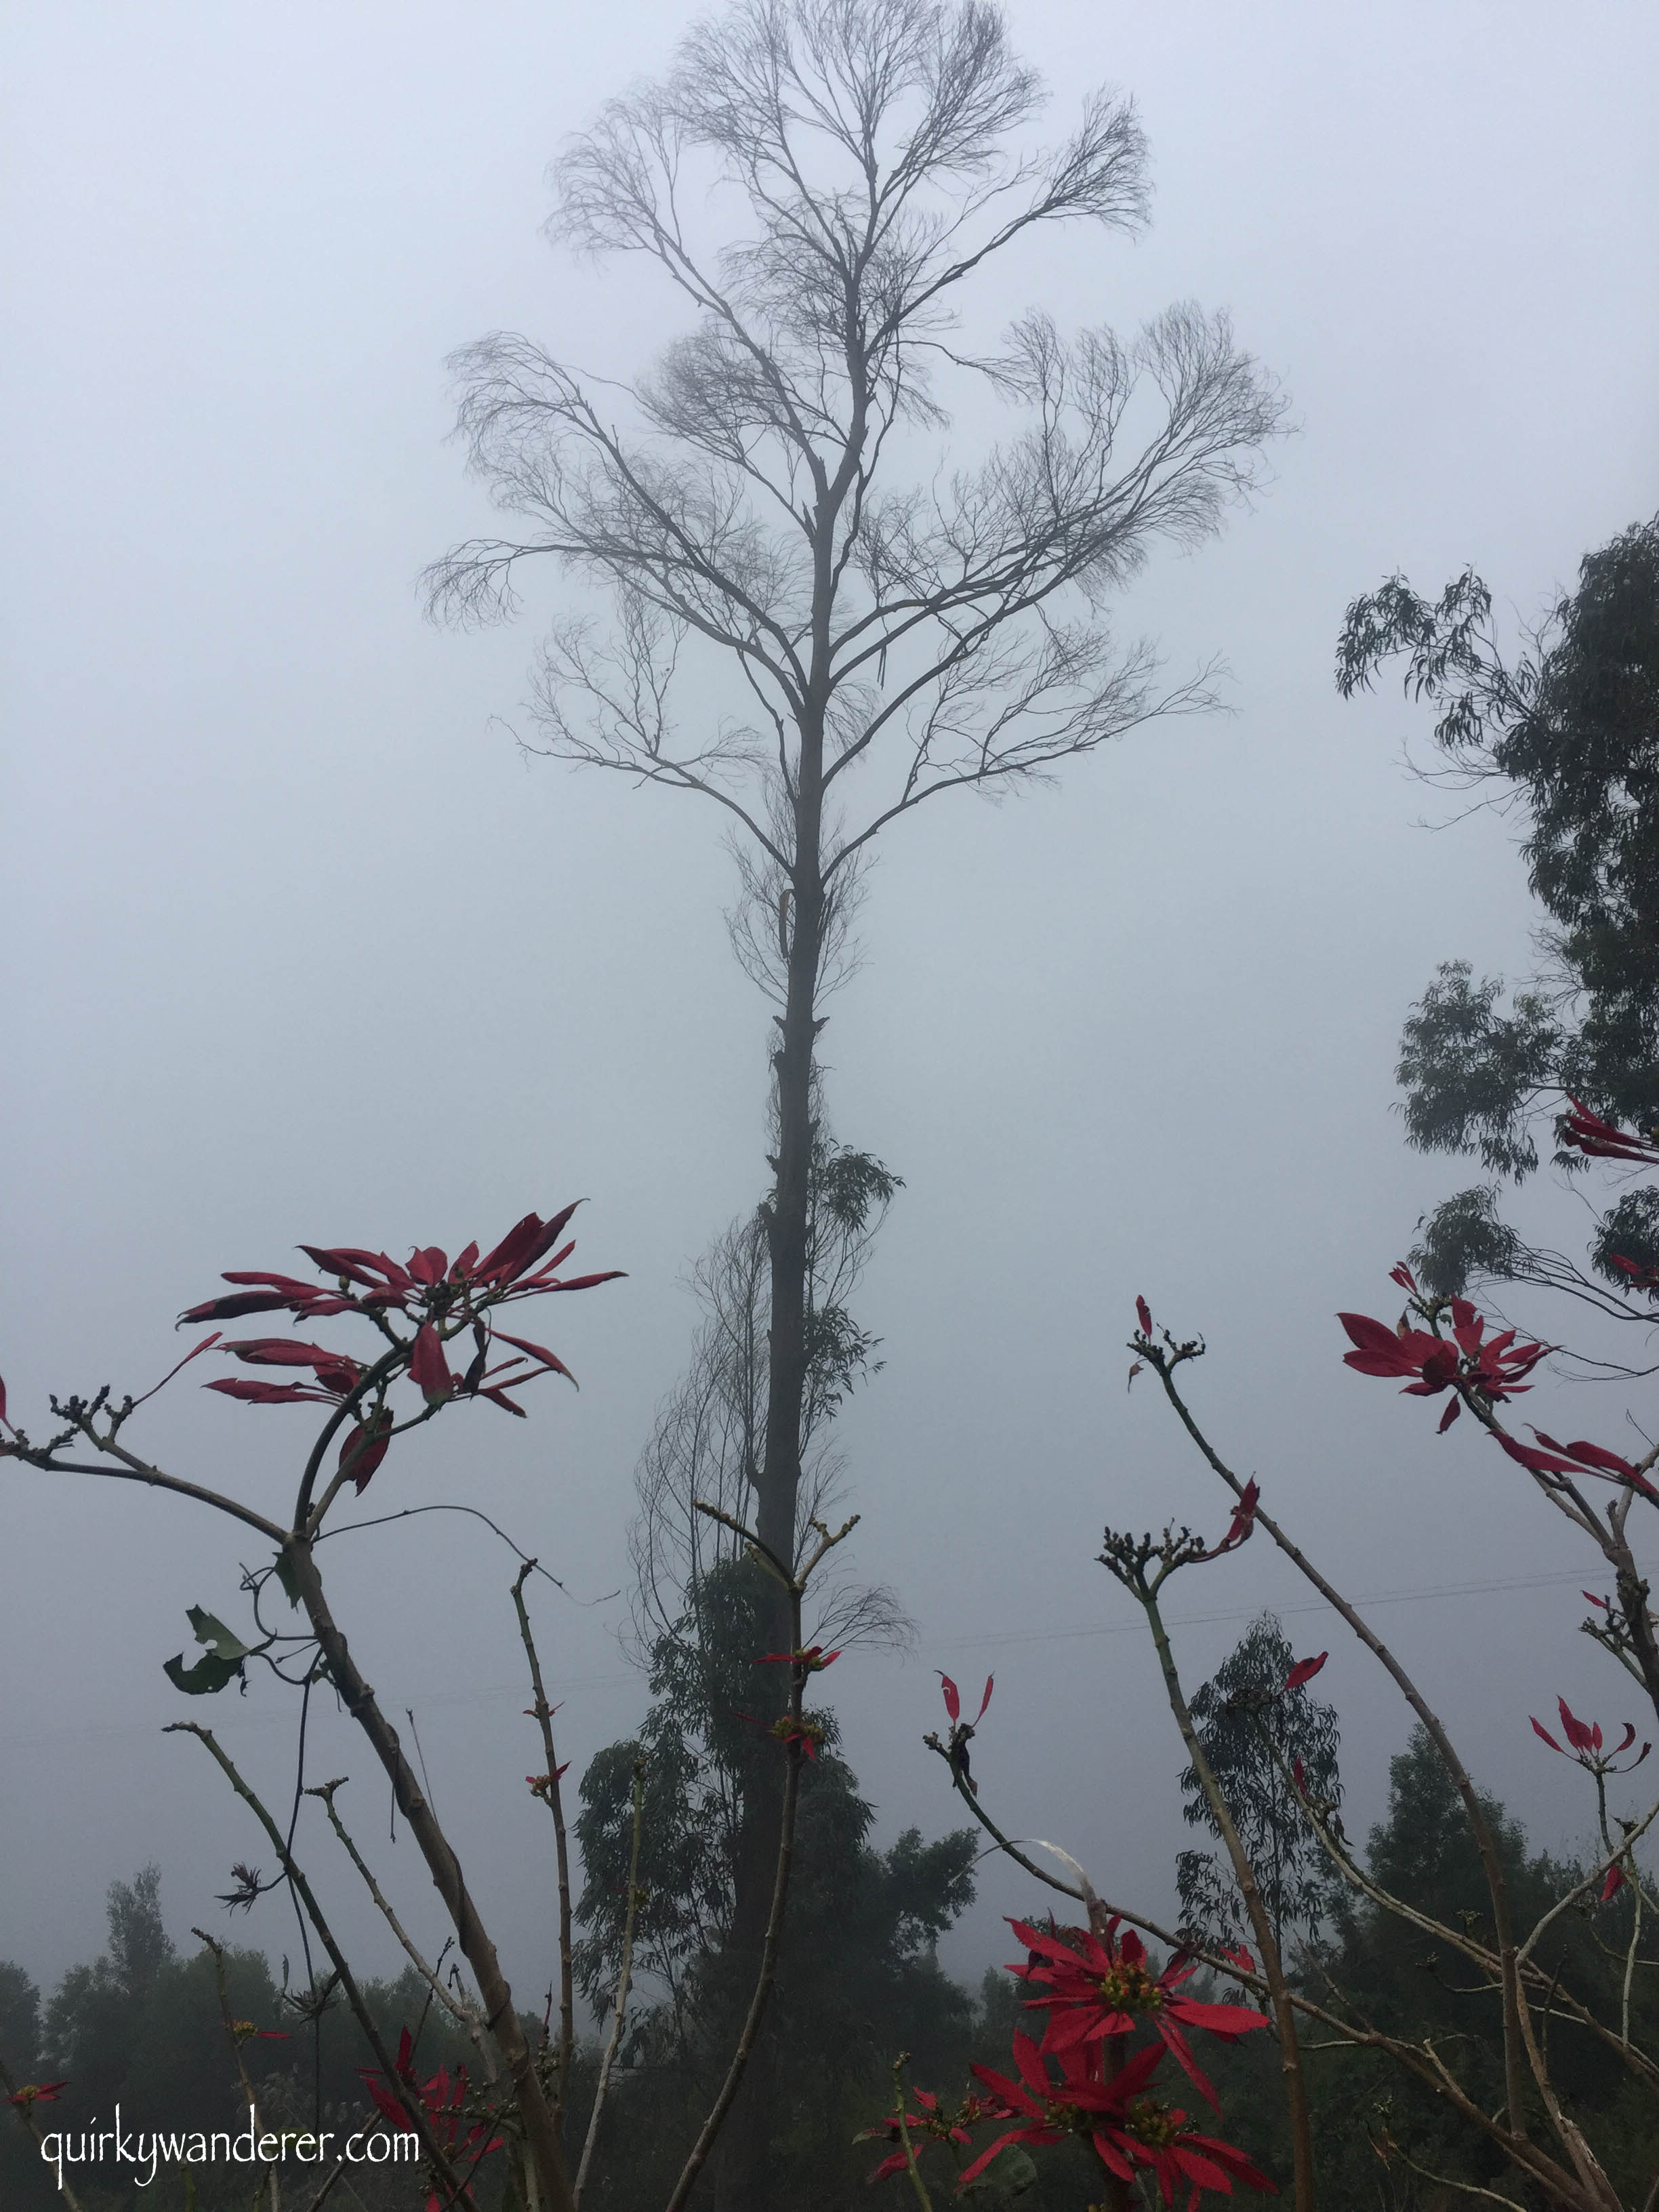 Kodaikanal is a famous hill station in Southern India. Here is a list of experiences you can have in the forests of Kodaikanal beyond the touristy hotspots.